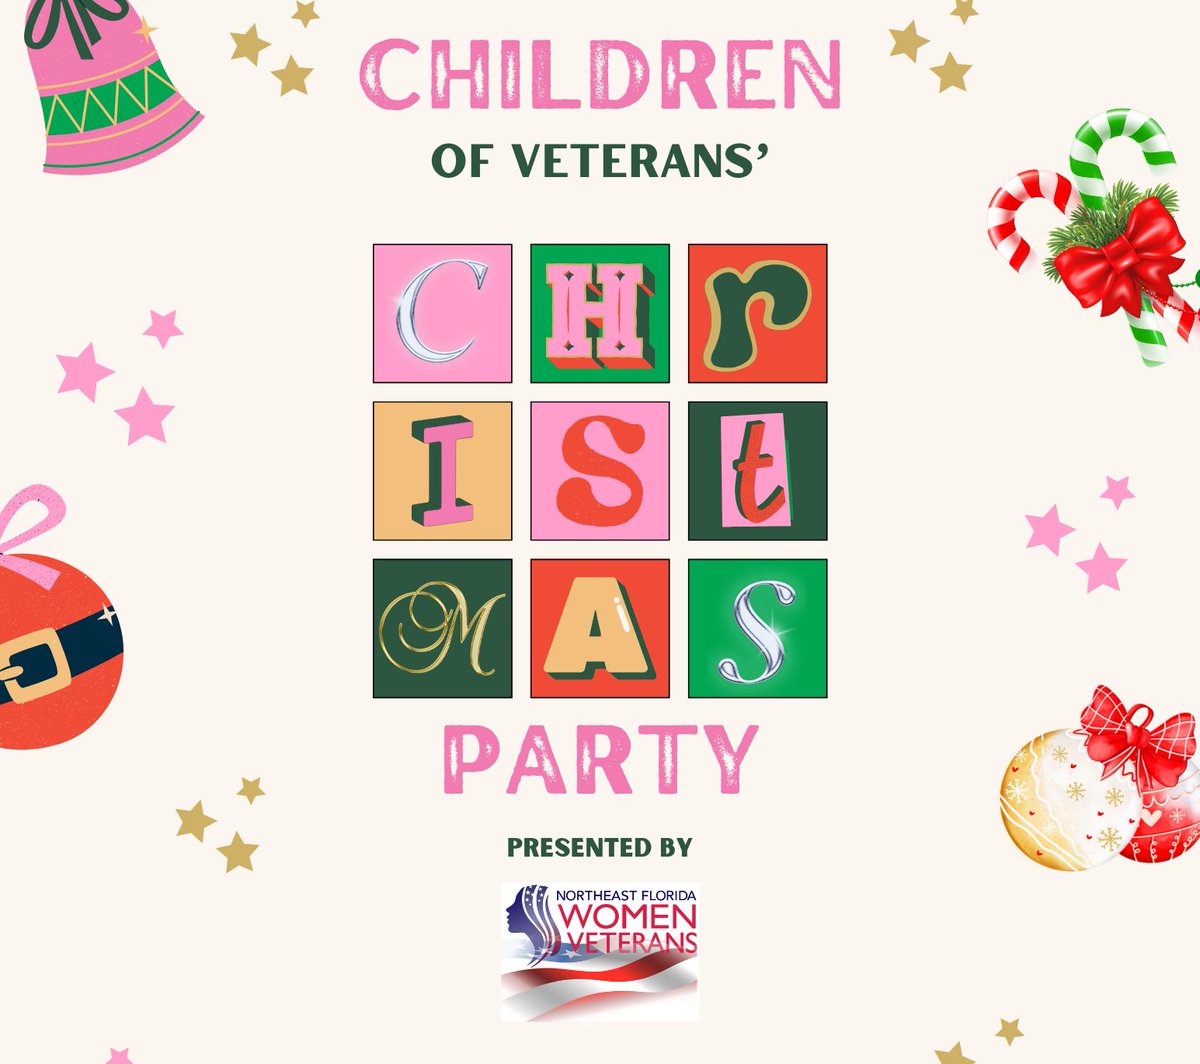 Exciting update! Our Children's Christmas party is at full capacity! Thank you to all who RSVP'd– get ready for a memorable celebration filled w/the magic & joy of the holiday season! Stay tuned for live updates. 🎅🎁 #ChristmasMagic #VeteranKids #JoyfulJamboree